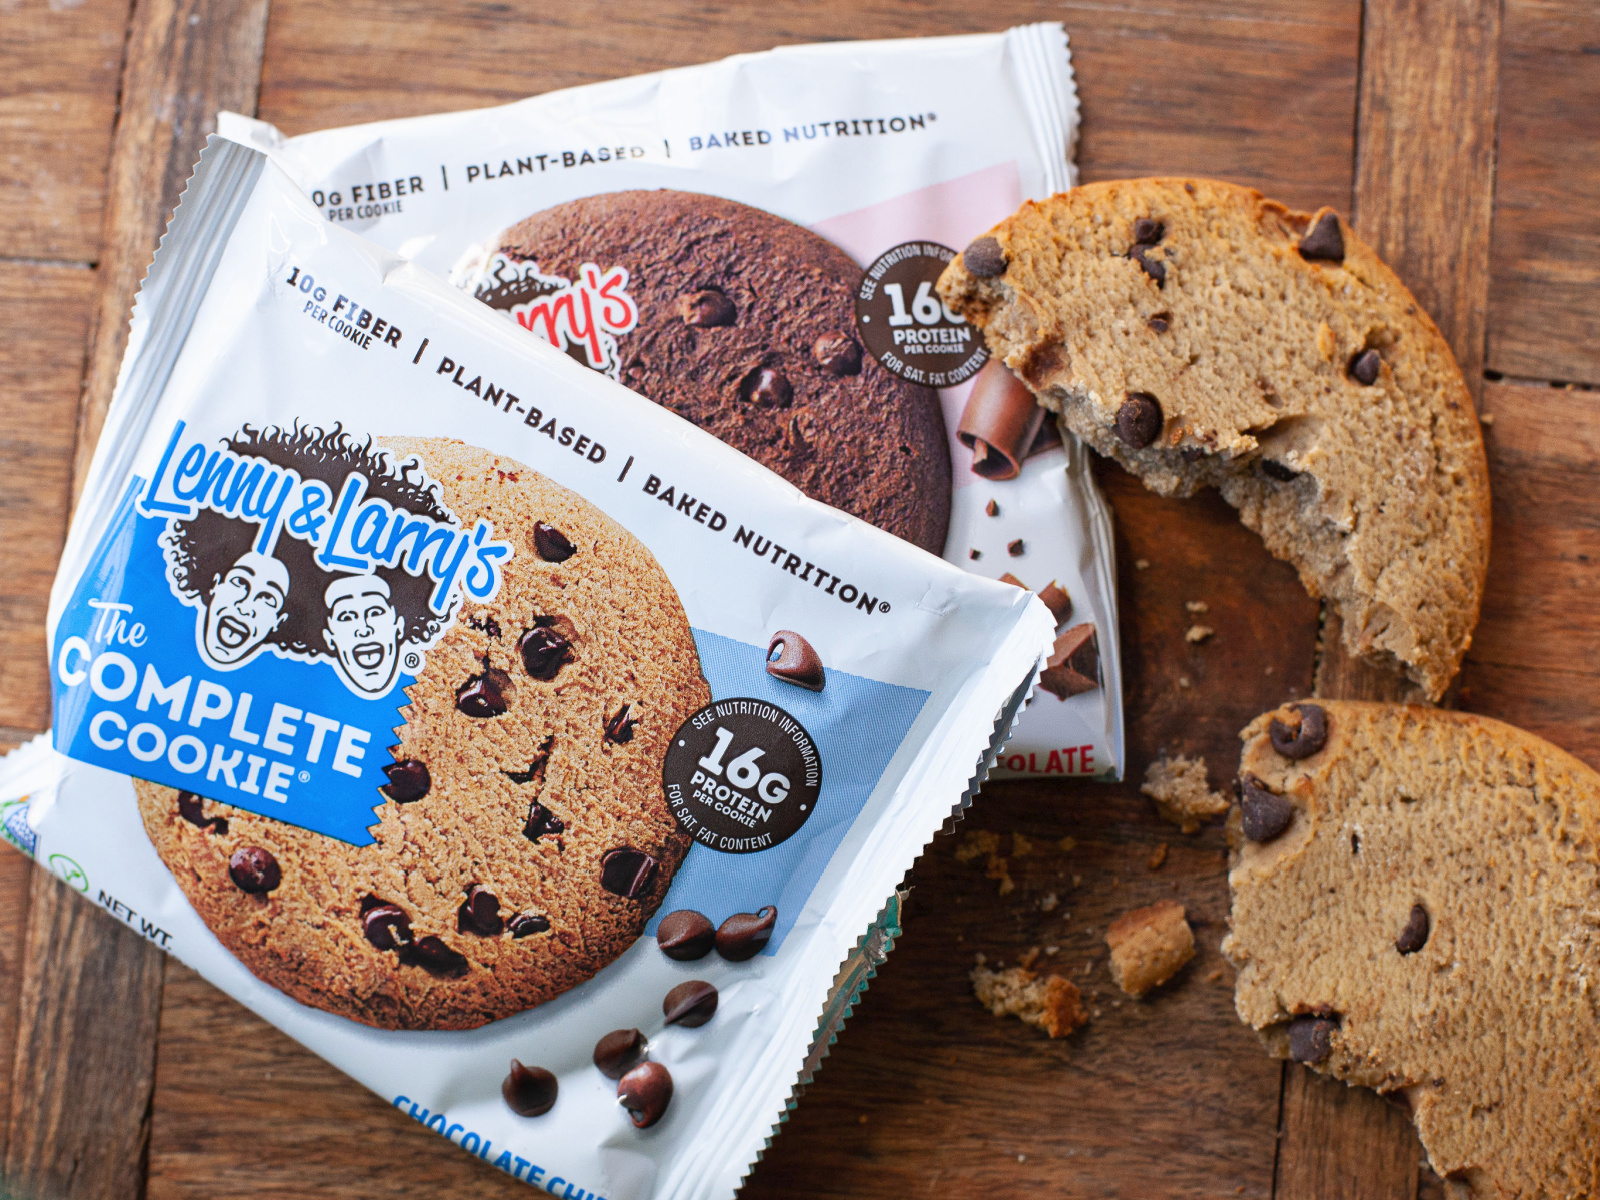 Lenny & Larry’s Deals At Kroger – Get The Complete Cookie-fied Bars For Just $1 (Plus Cheap Cookies!)